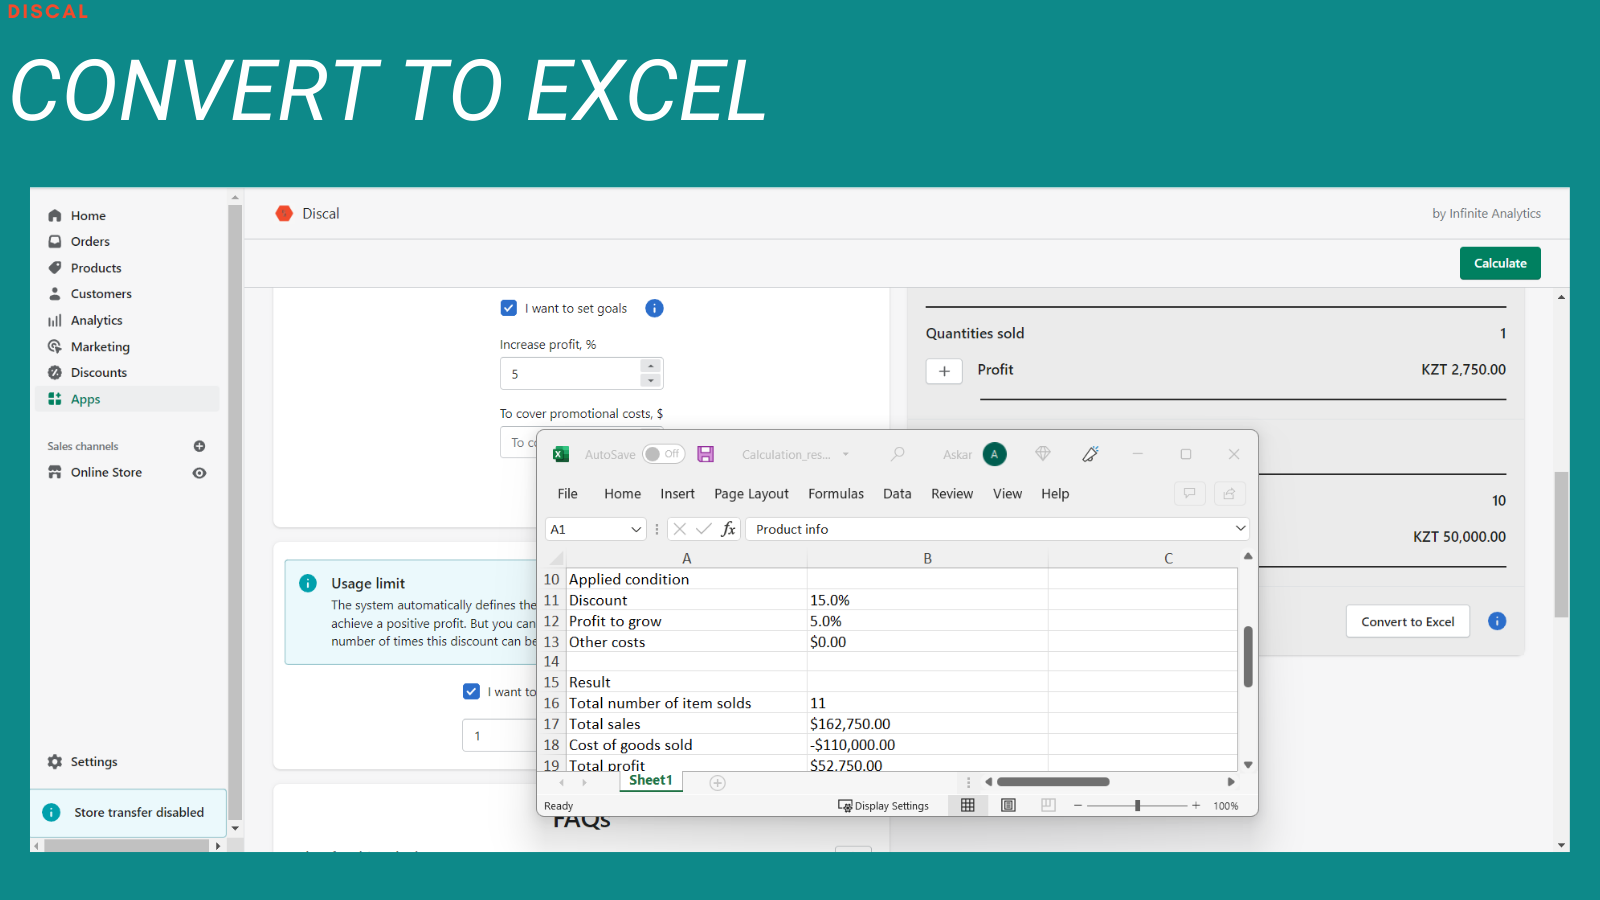 Convert to excel